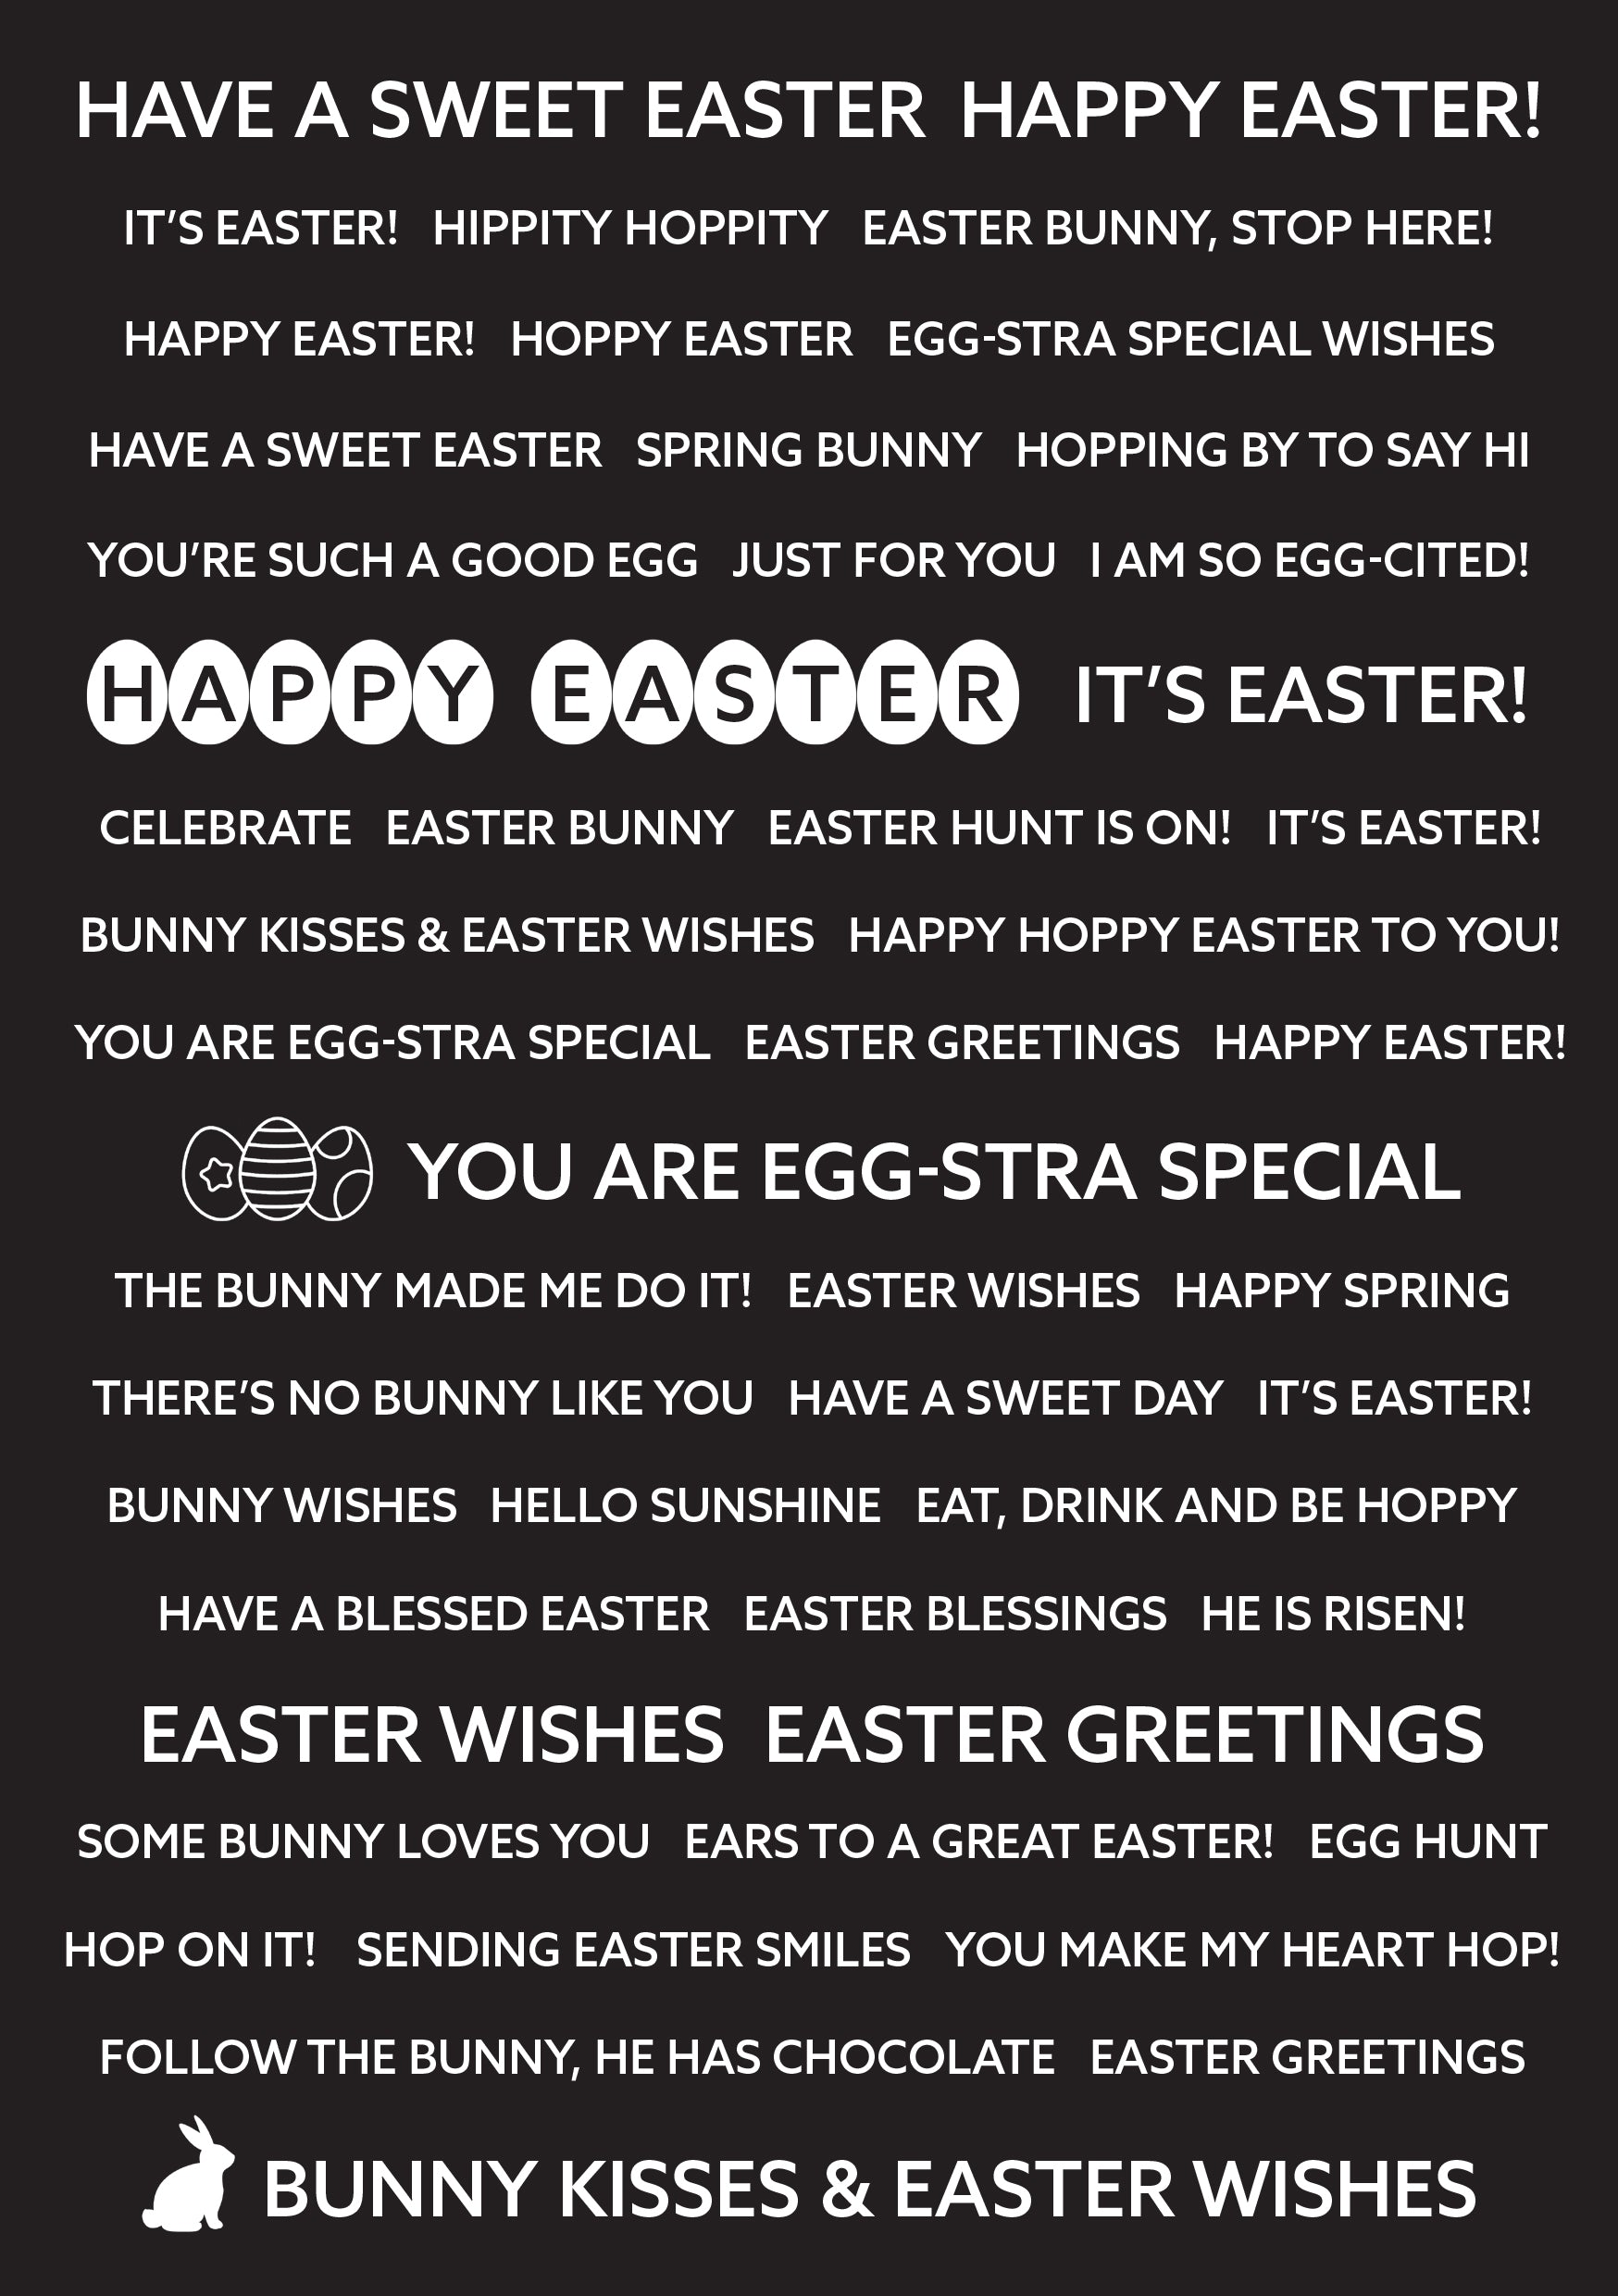 Creative Expressions Wordies Happy Easter Sentiment Sheets